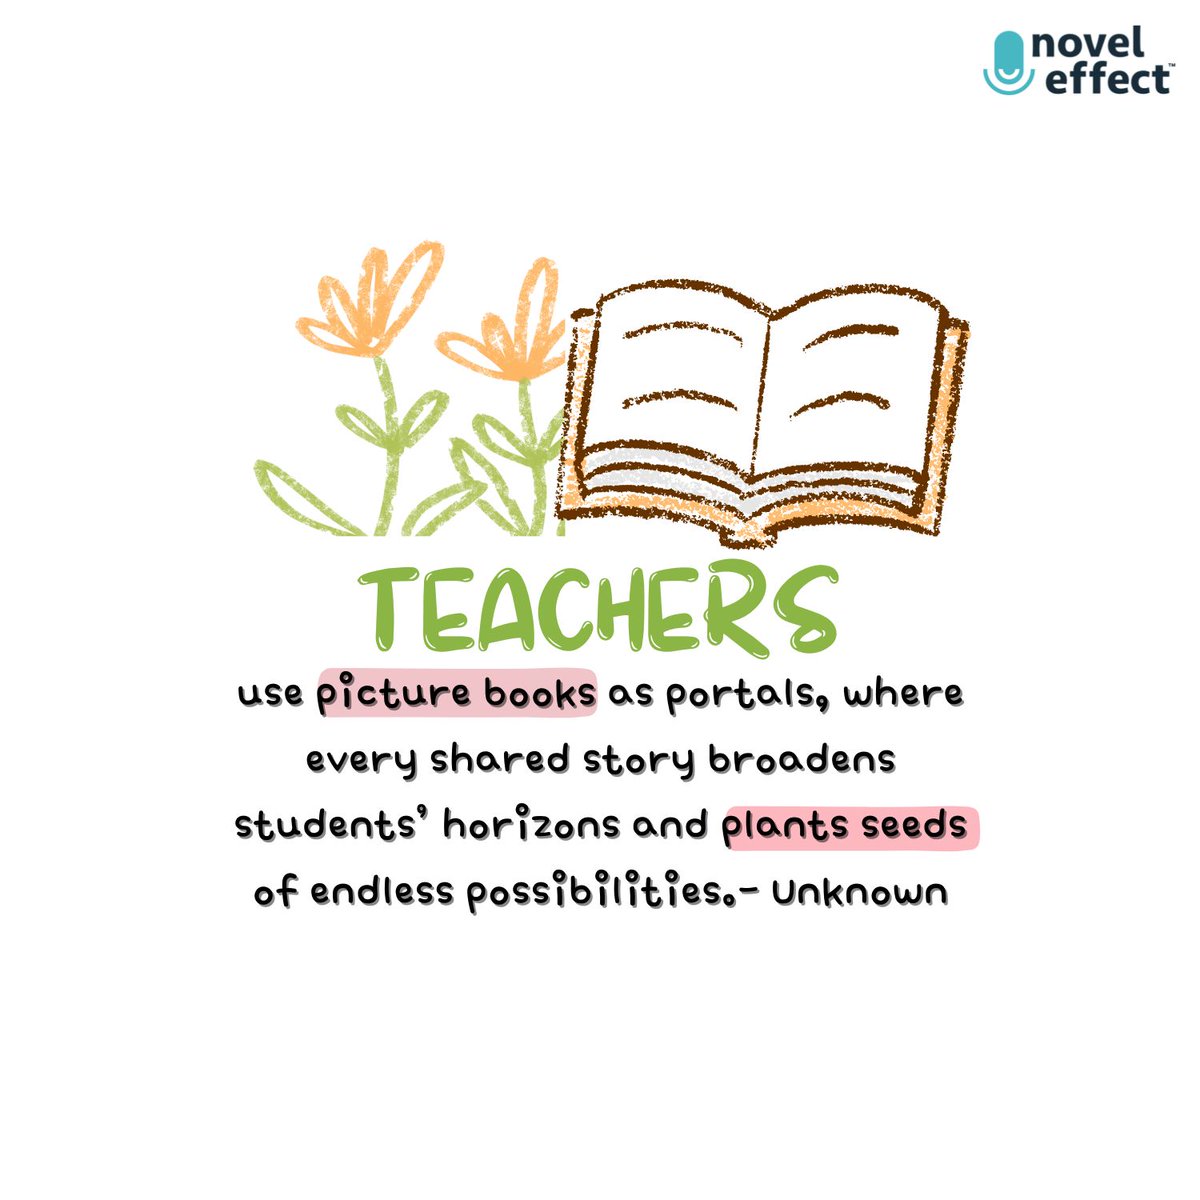 Happy Teacher Appreciation Week! To show our appreciation, educators get 50% off a 1 Year Novel Effect subscription with the code TAPP24 at checkout: buff.ly/3GgyubW Tag a friend that needs to see this or RETWEET to share this $25 megadeal🍎💐